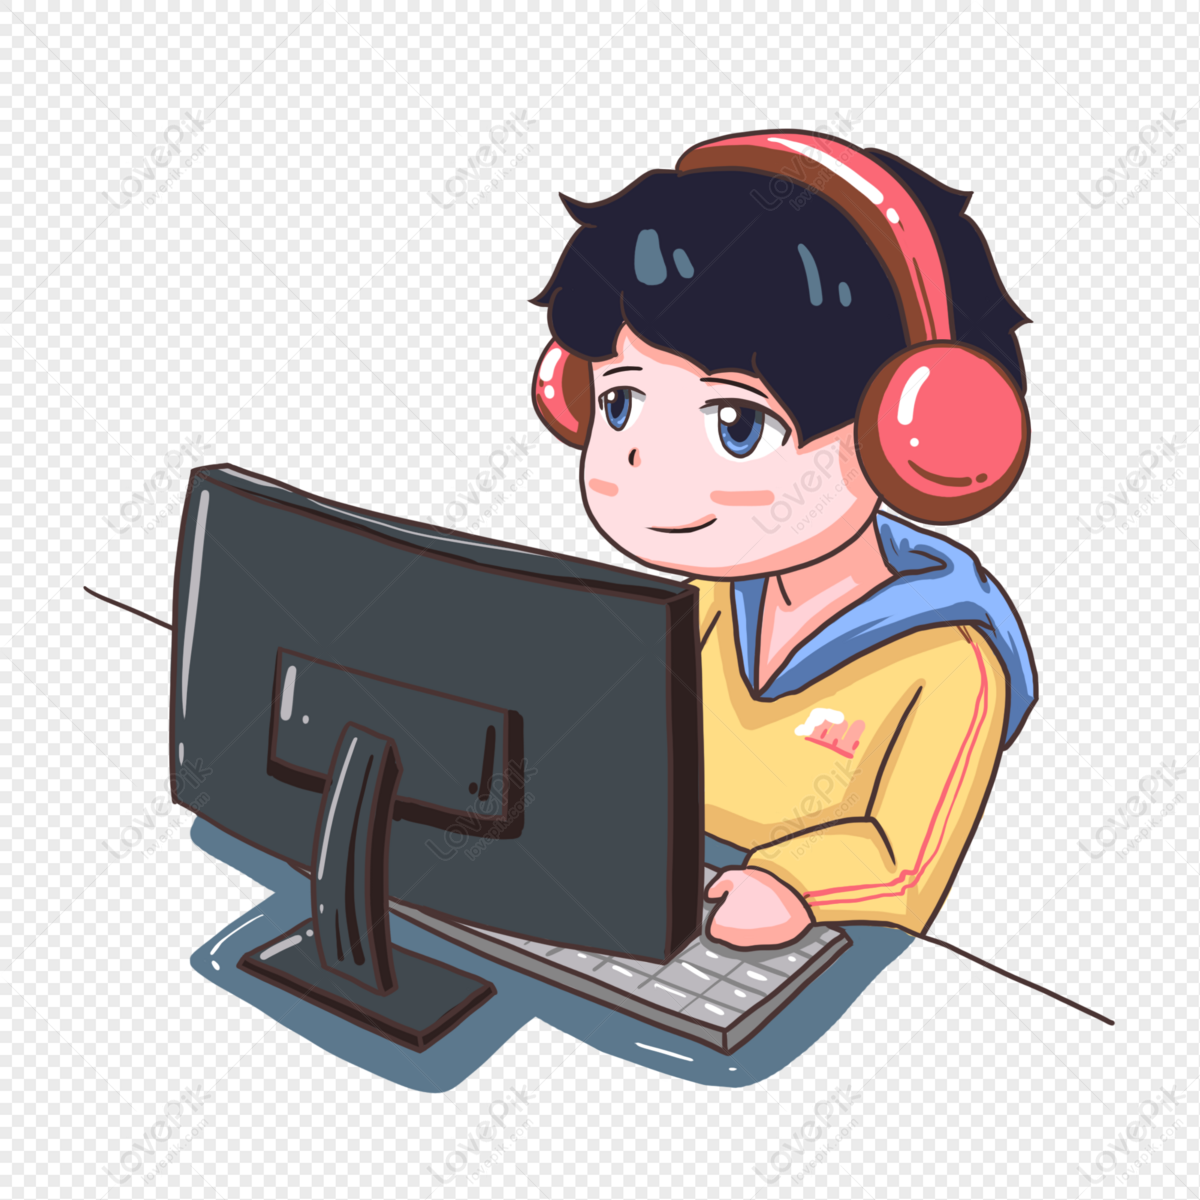 Gamer PNG Image Free Download And Clipart Image For Free Download - Lovepik  | 401728031